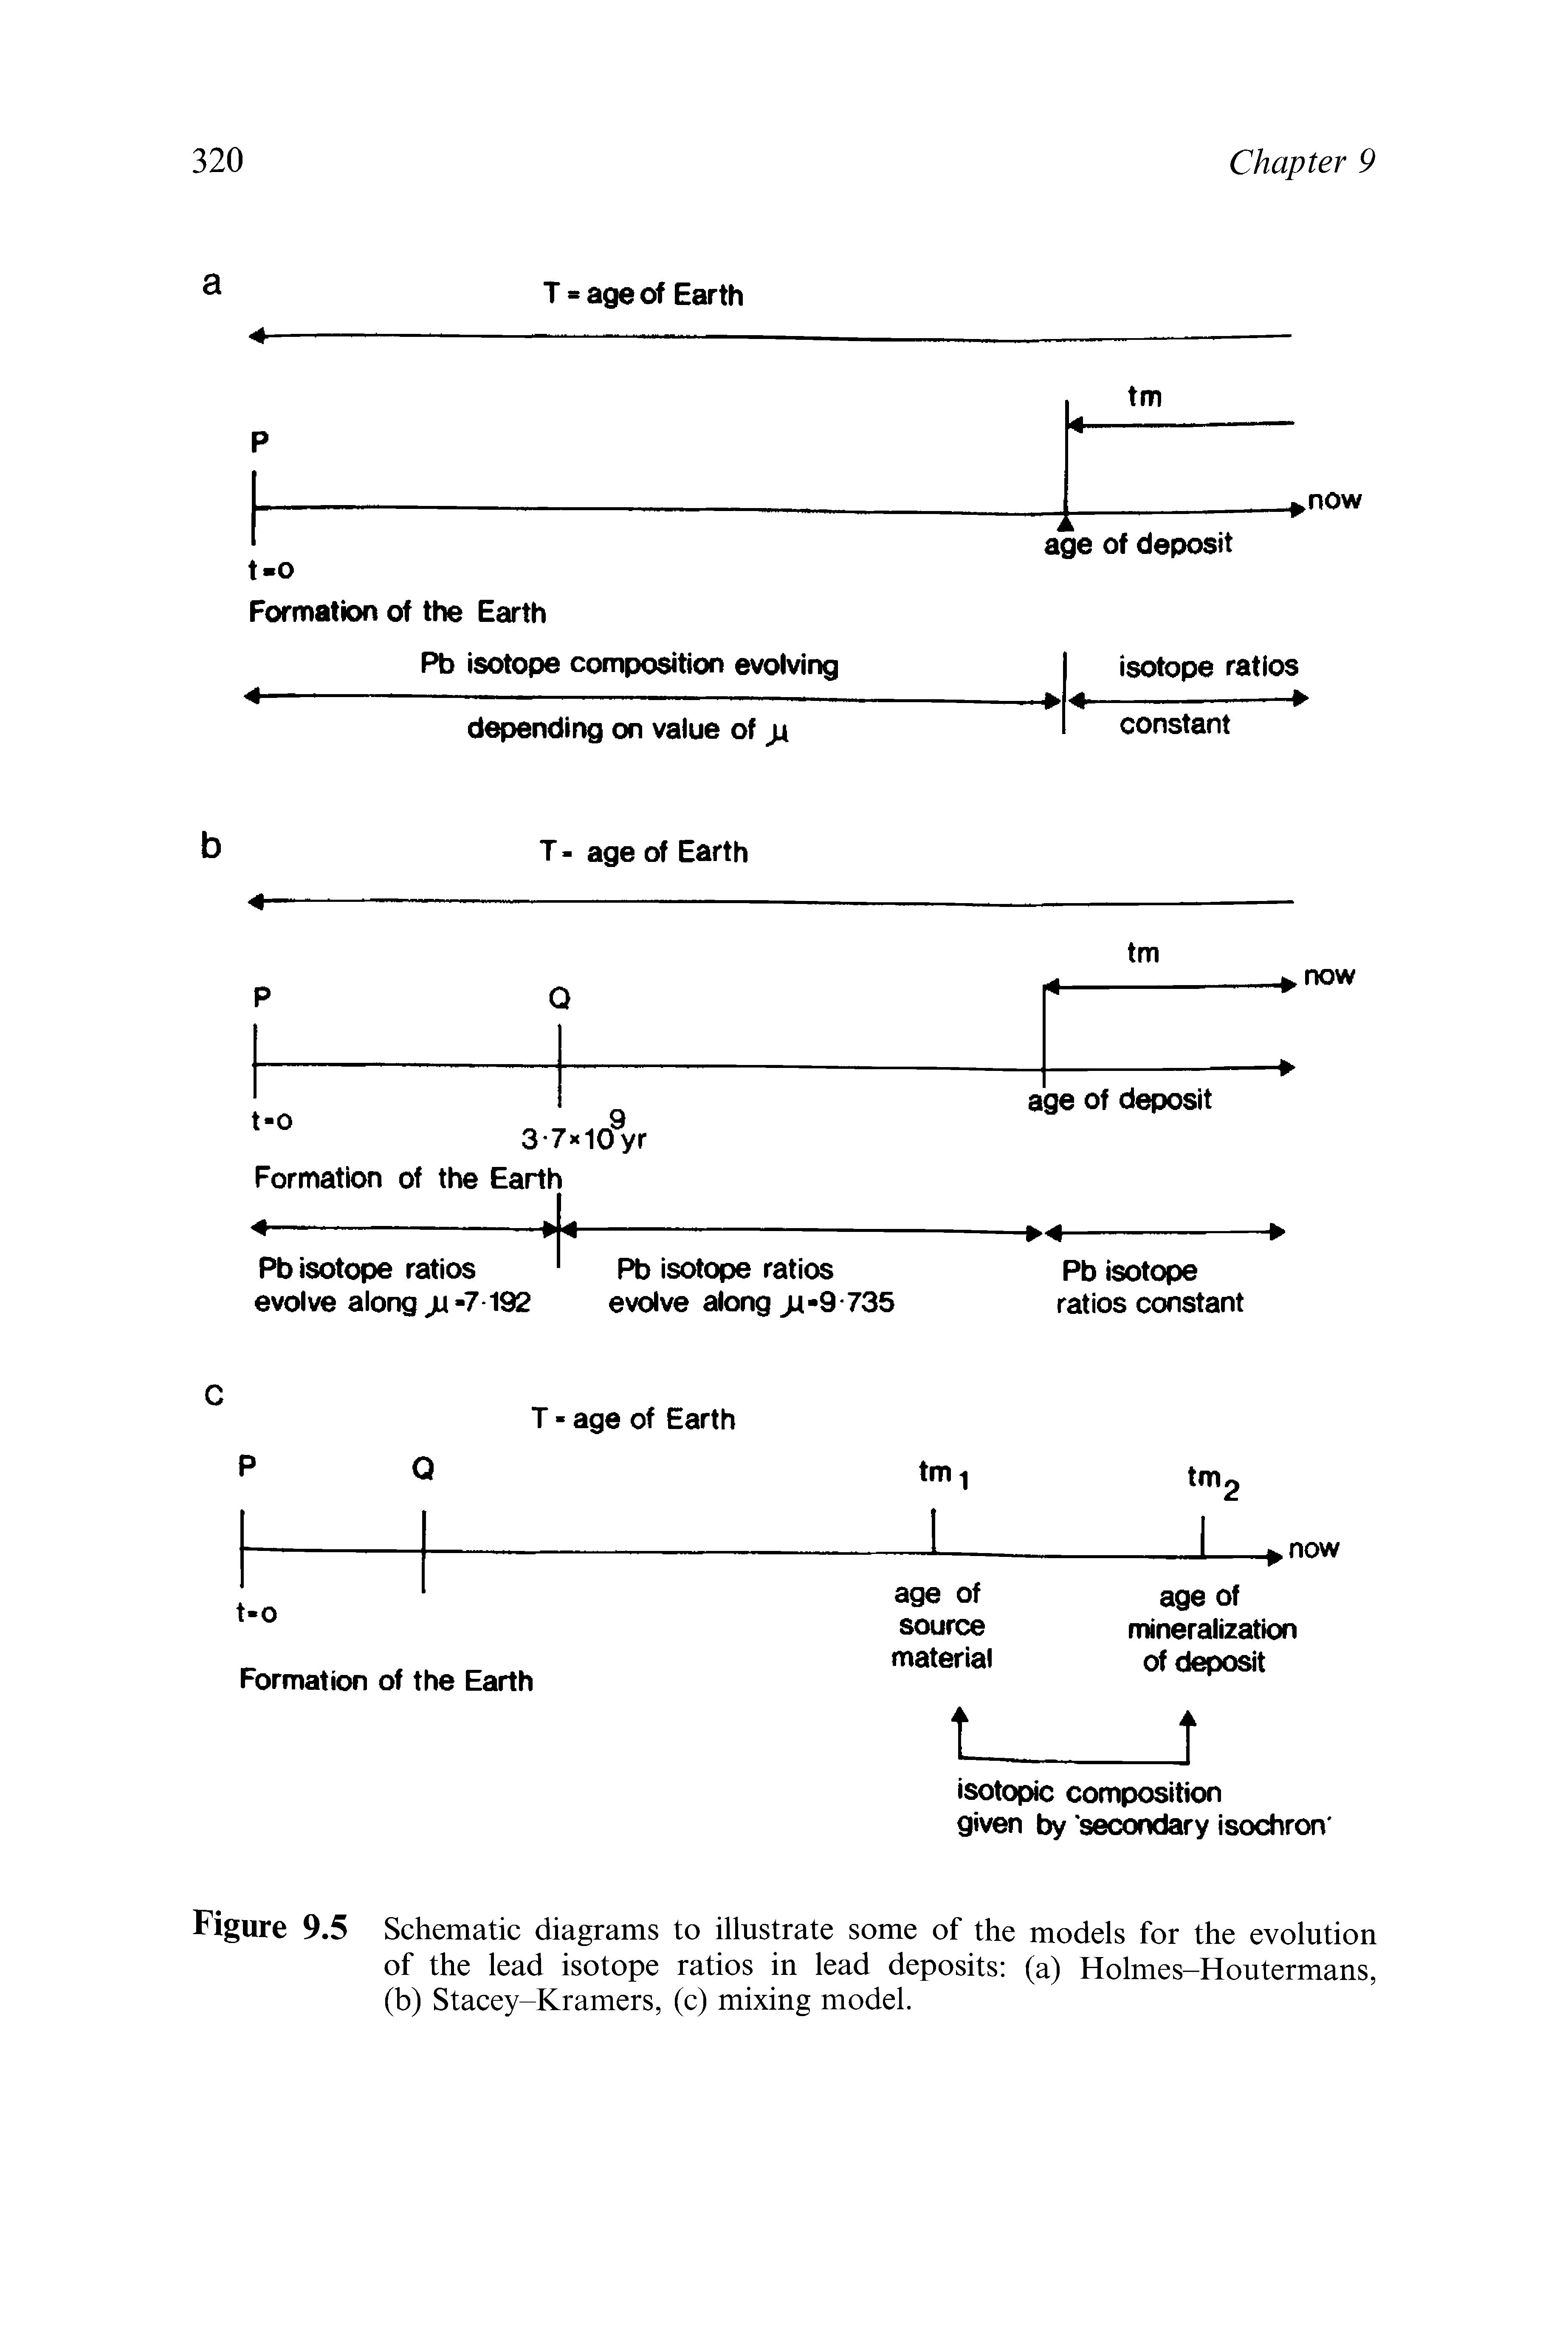 Figure 9.5 Schematic diagrams to illustrate some of the models for the evolution of the lead isotope ratios in lead deposits (a) Holmes-Houtermans, (b) Stacey-Kramers, (c) mixing model.